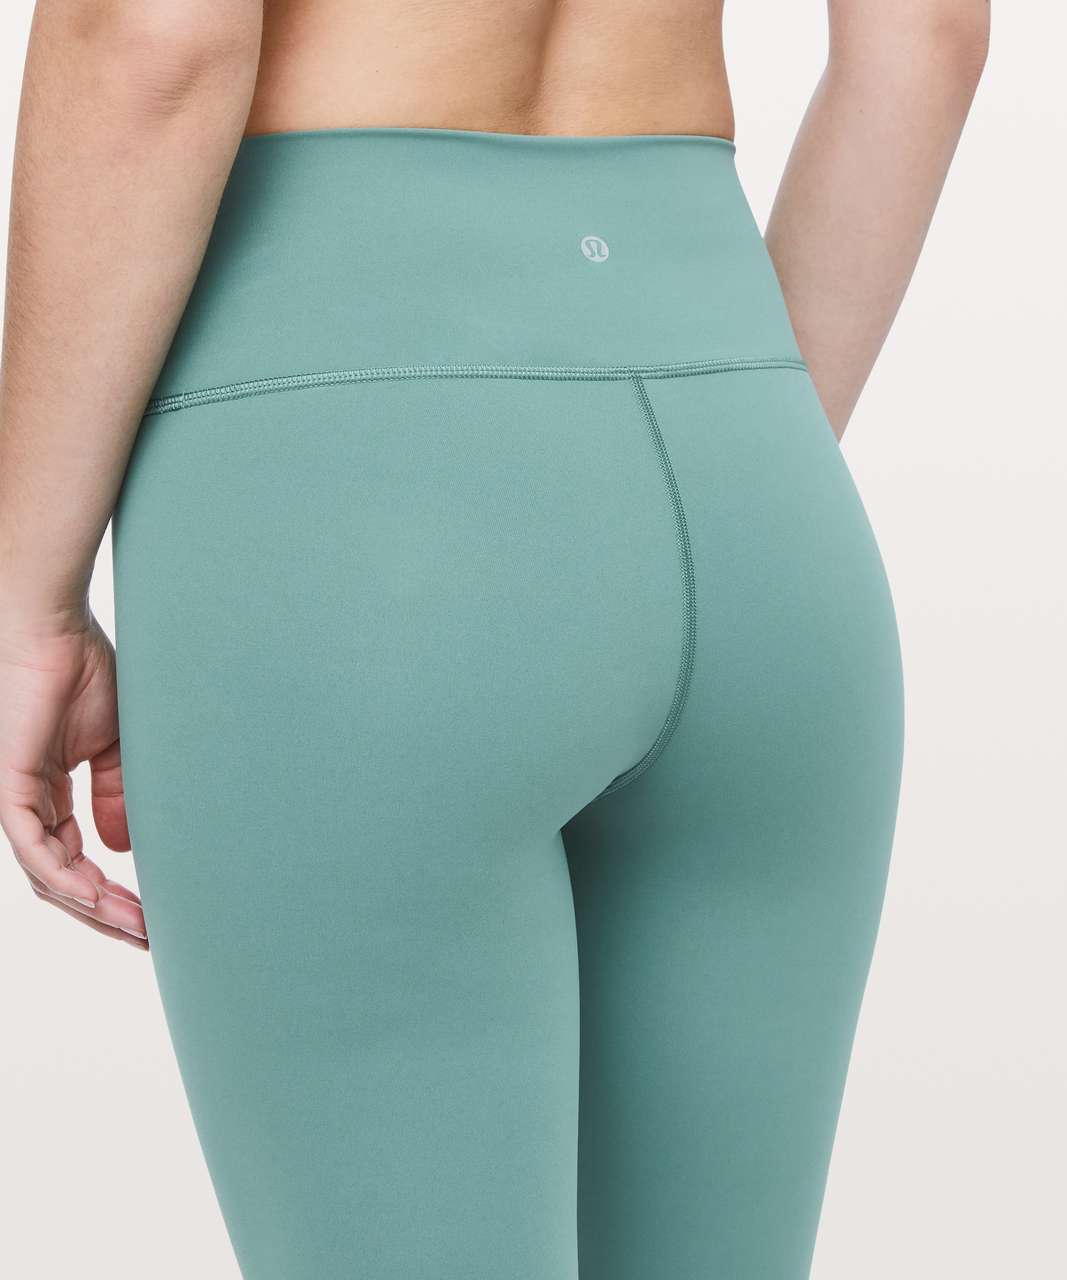 Lululemon Wunder Under High-Rise 1/2 Tight Full-On Luxtreme 17" - Frosted Pine